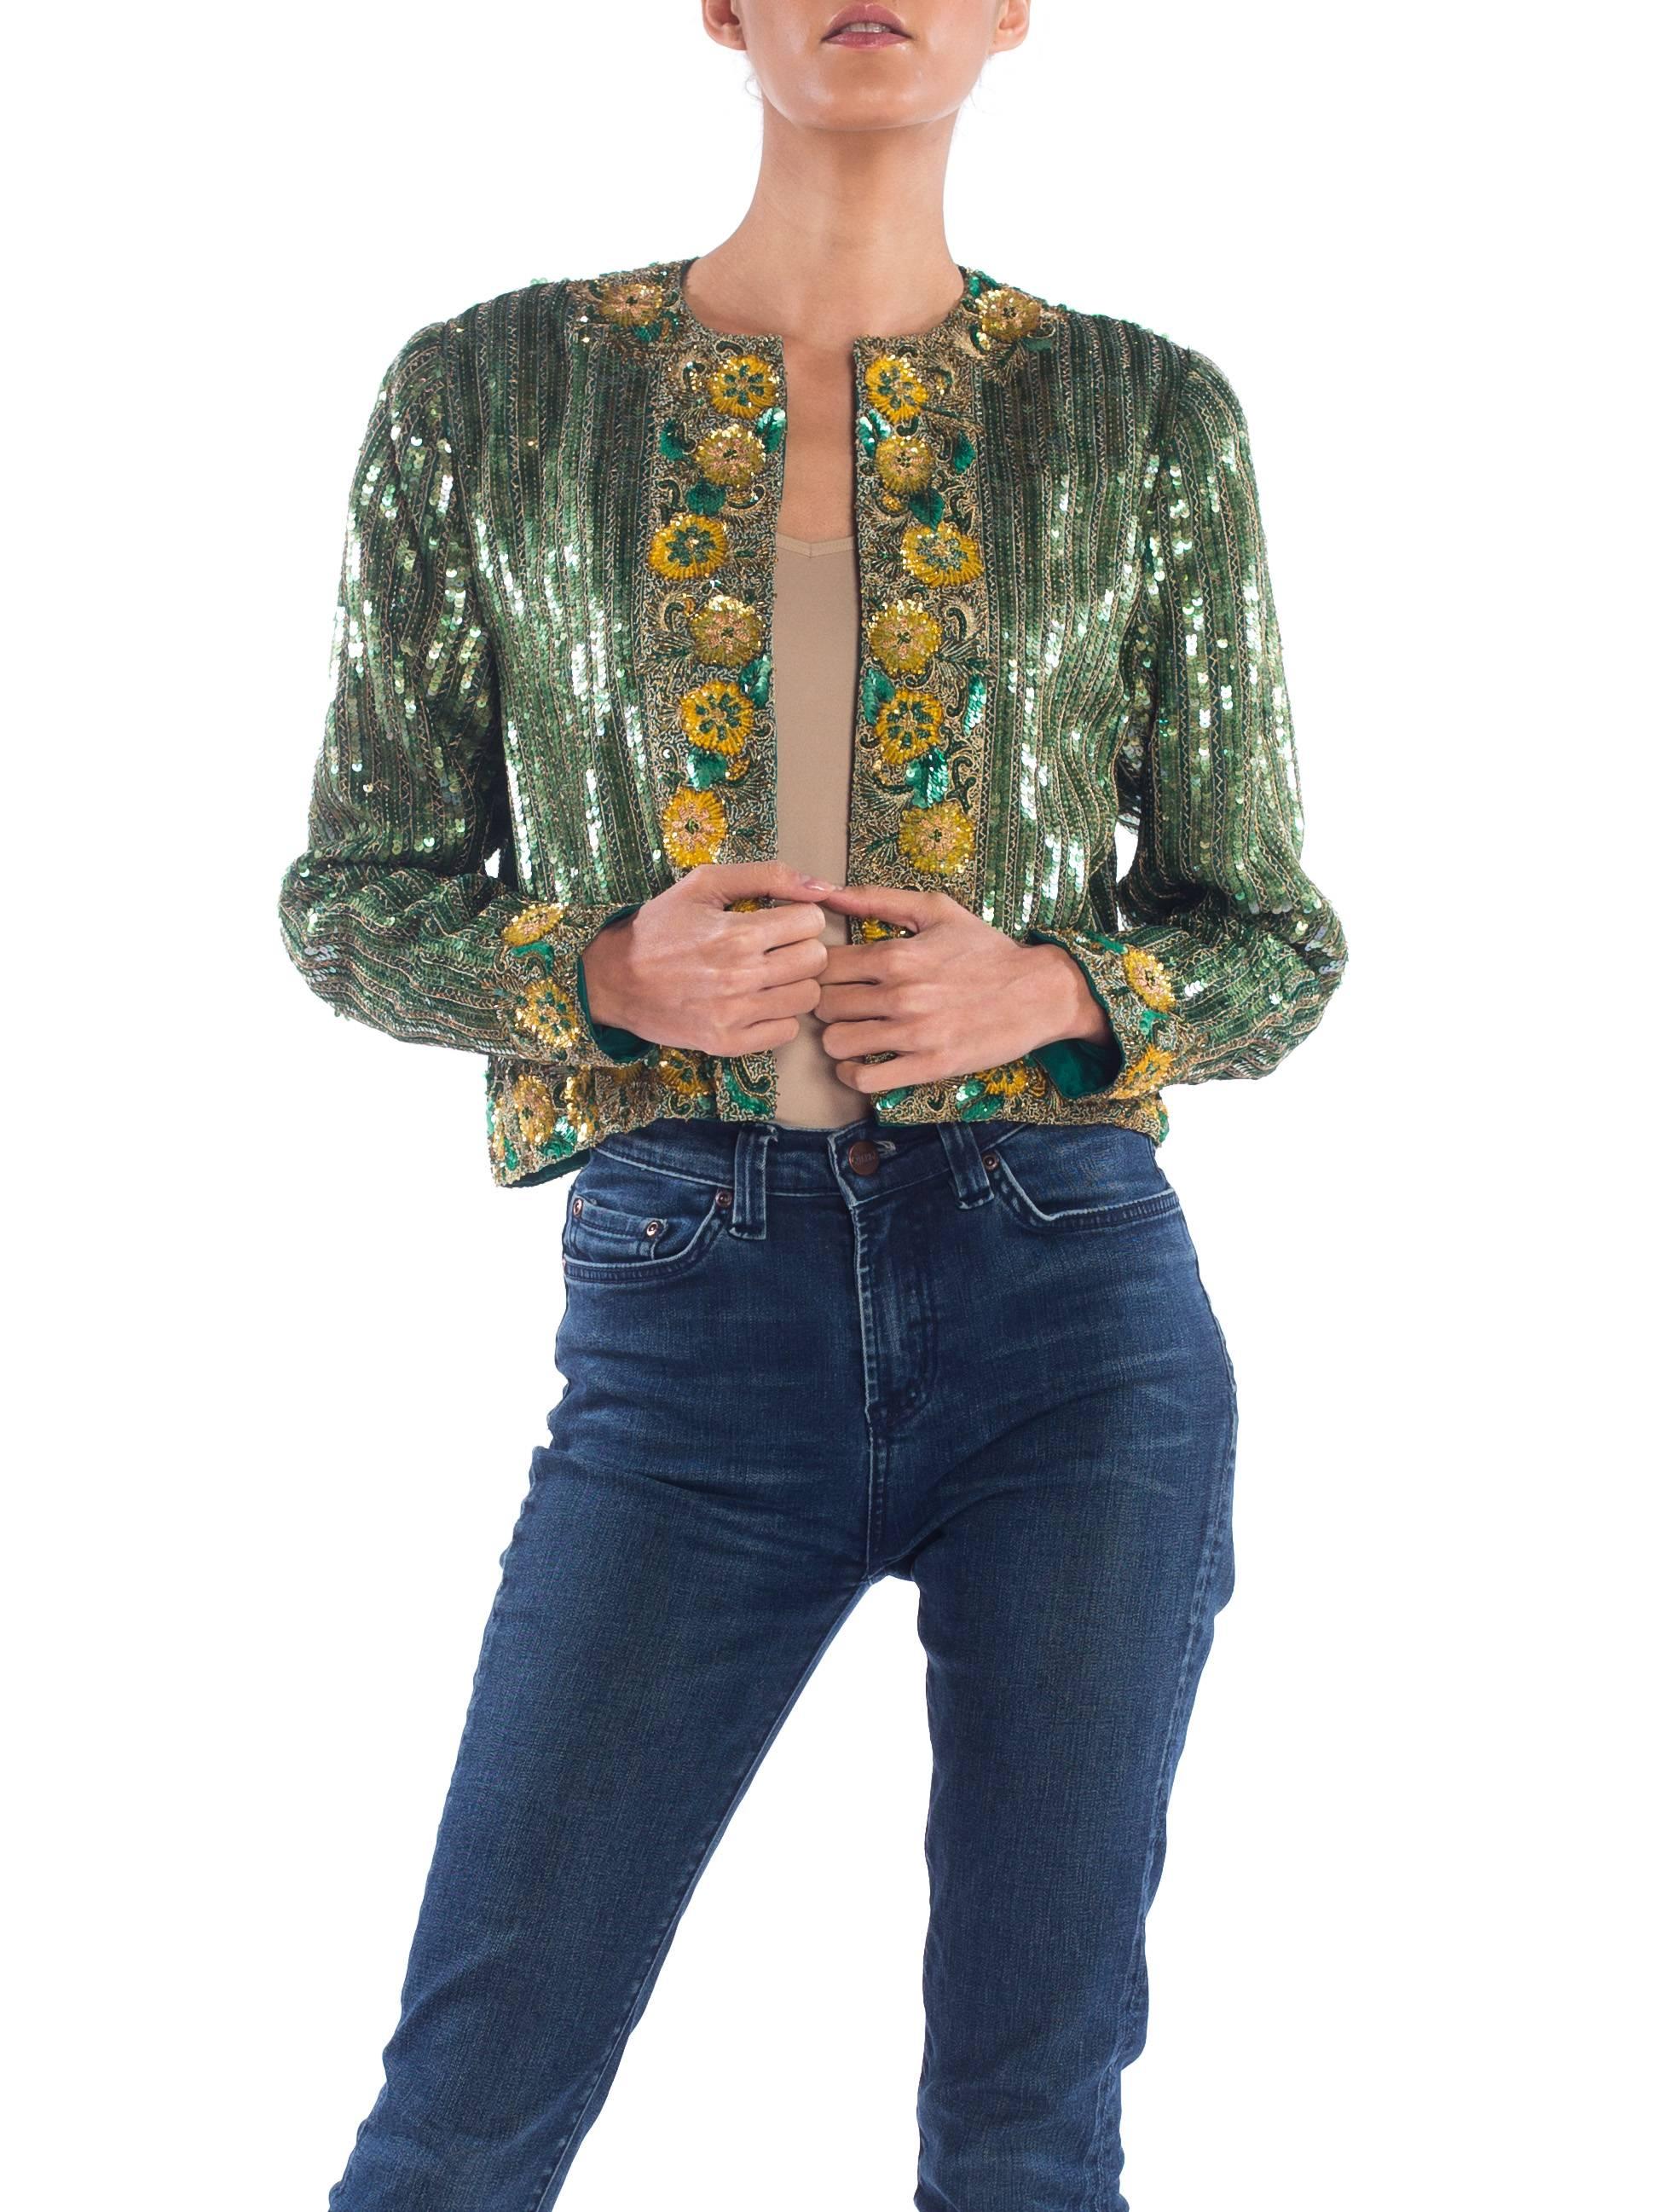 Women's 1980S RICHILENE Emerald Green Silk Jacket Beaded With Gold Flowers & Embroidery